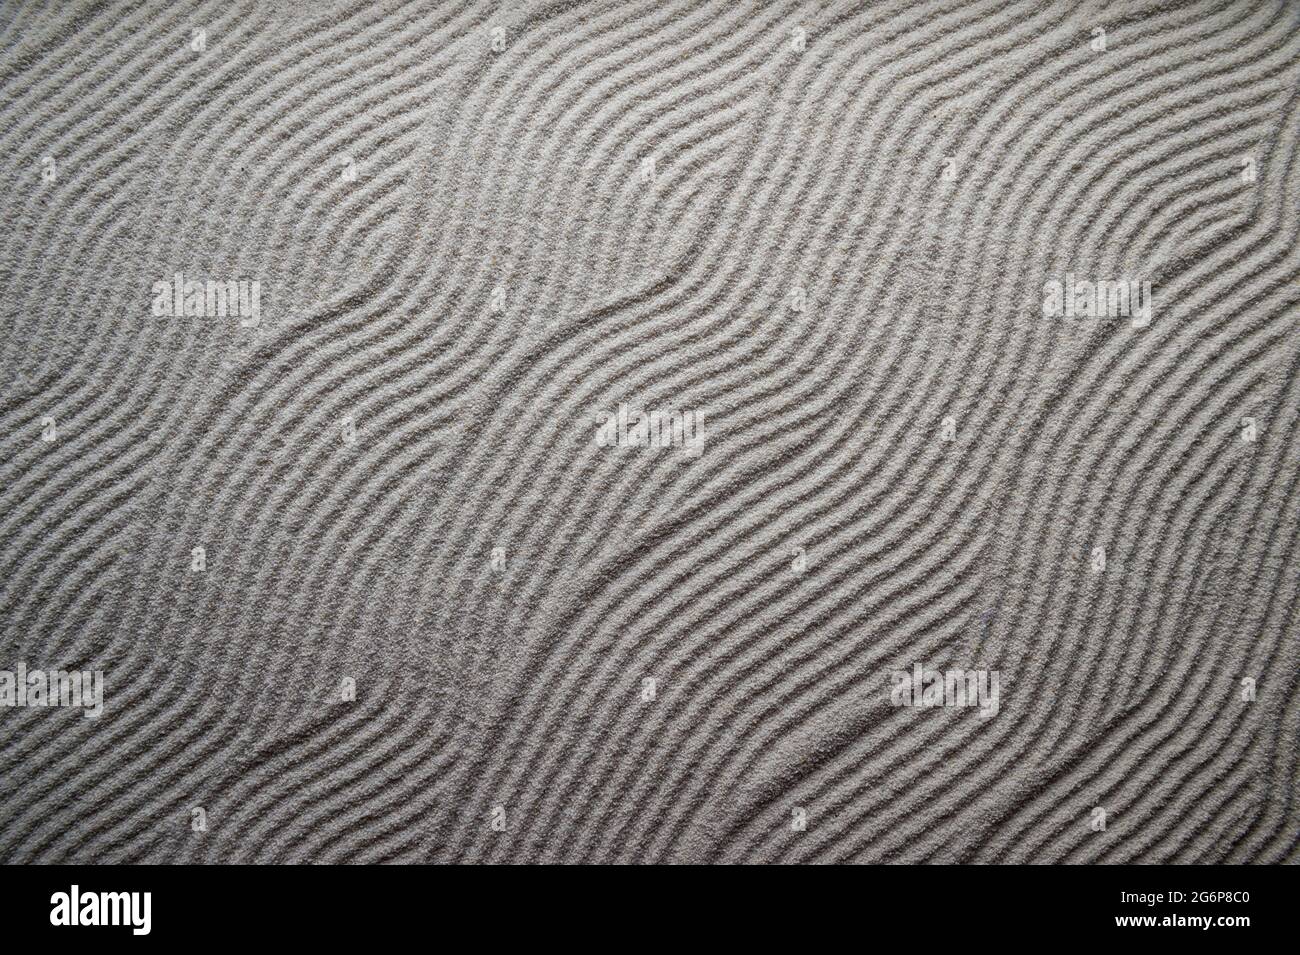 Simple graphic wave patterns raked into a background in the white gravel of a Japanese Zen garden Stock Photo